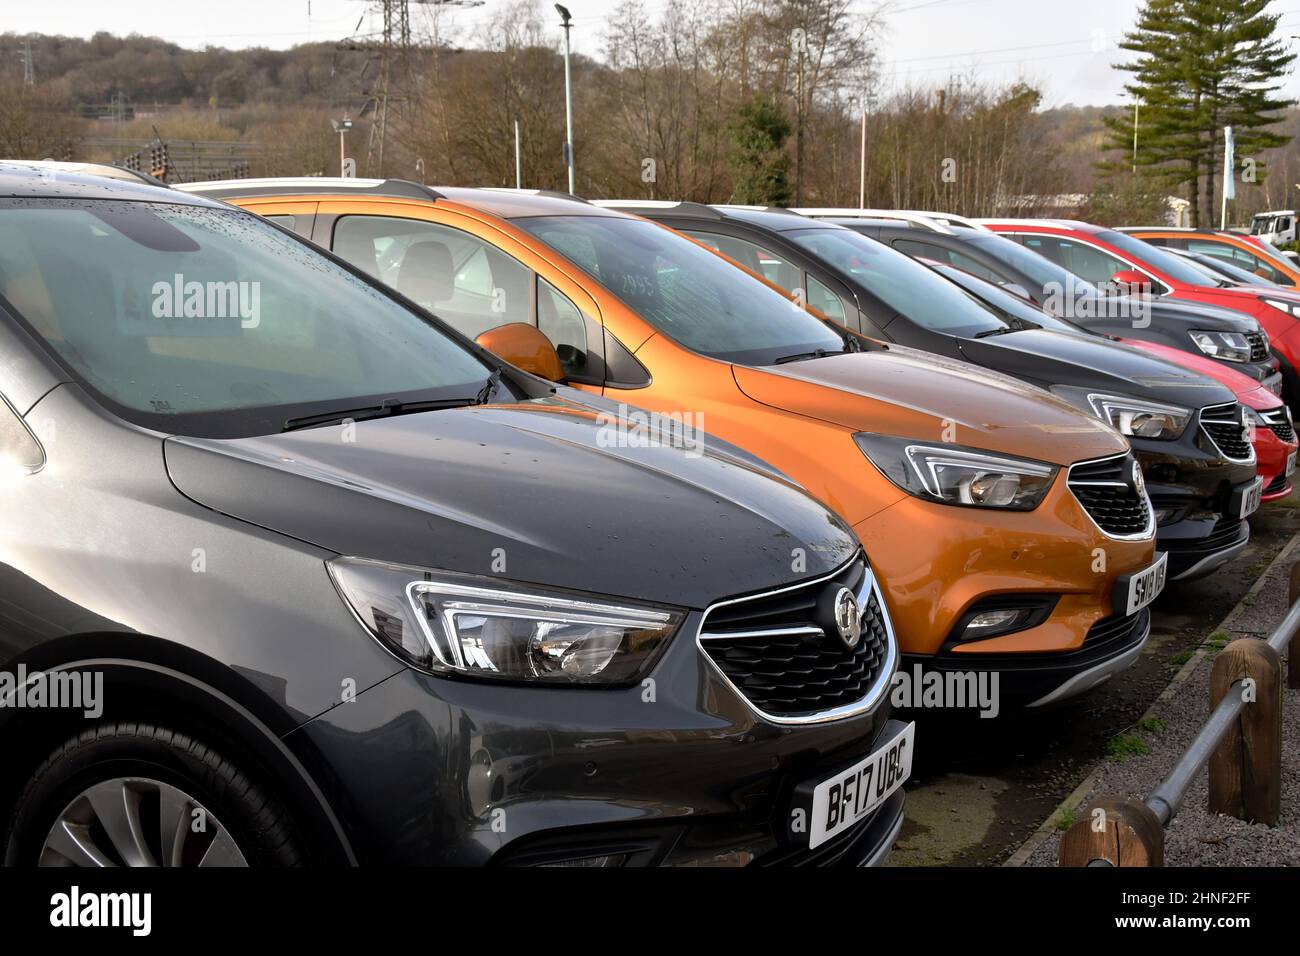 Treforest, Wales - February 2022: Row of second hand cars on sale outside a Vauxhall car dealership Stock Photo